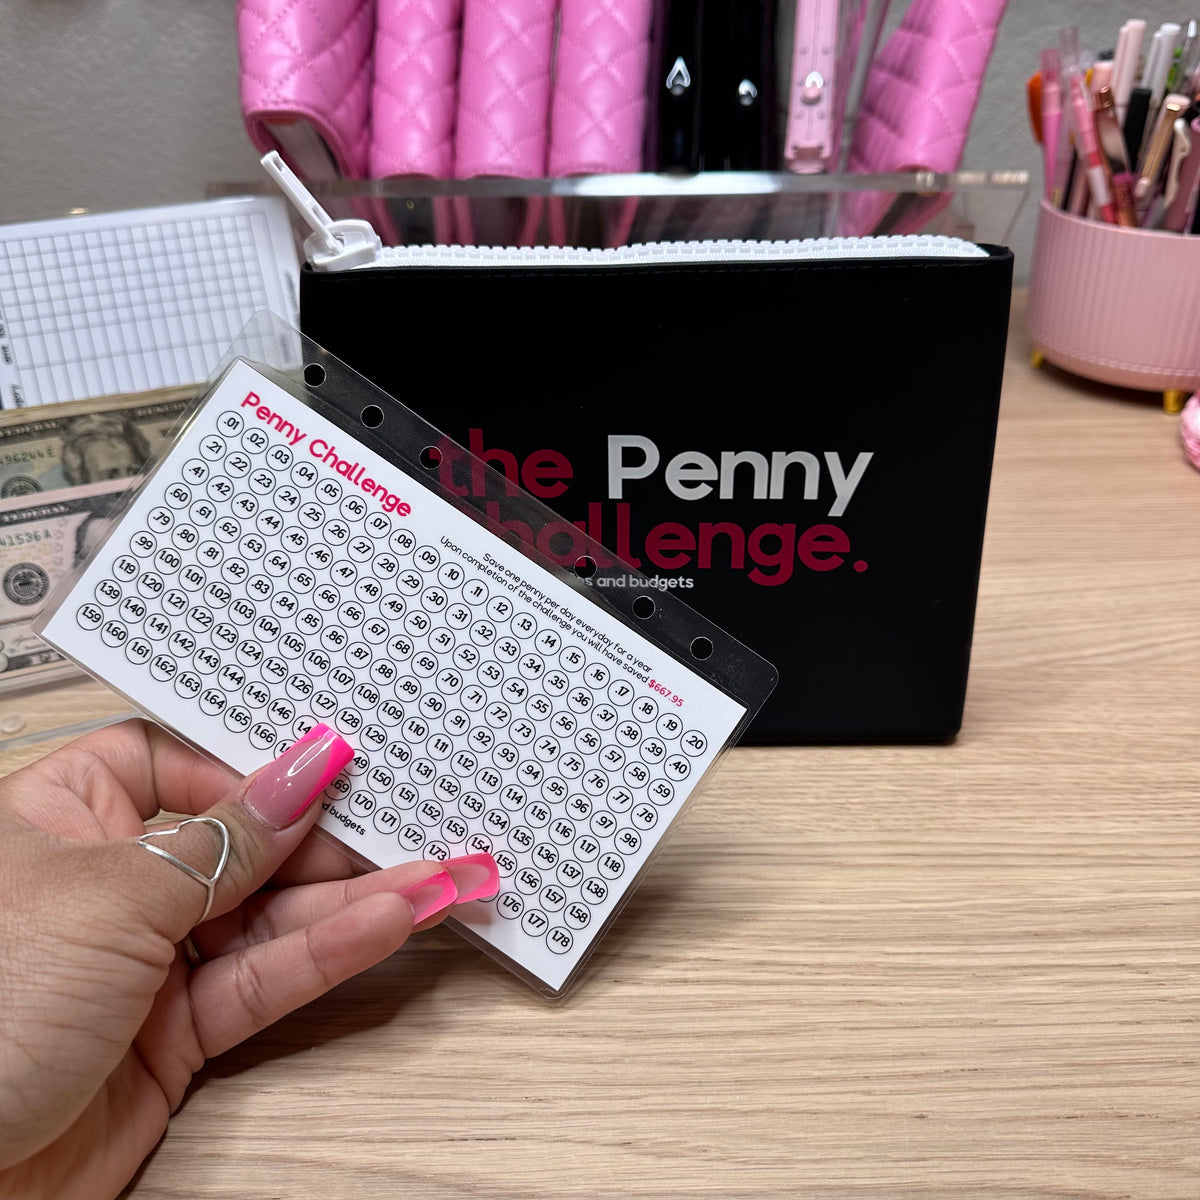 The Penny Challenge